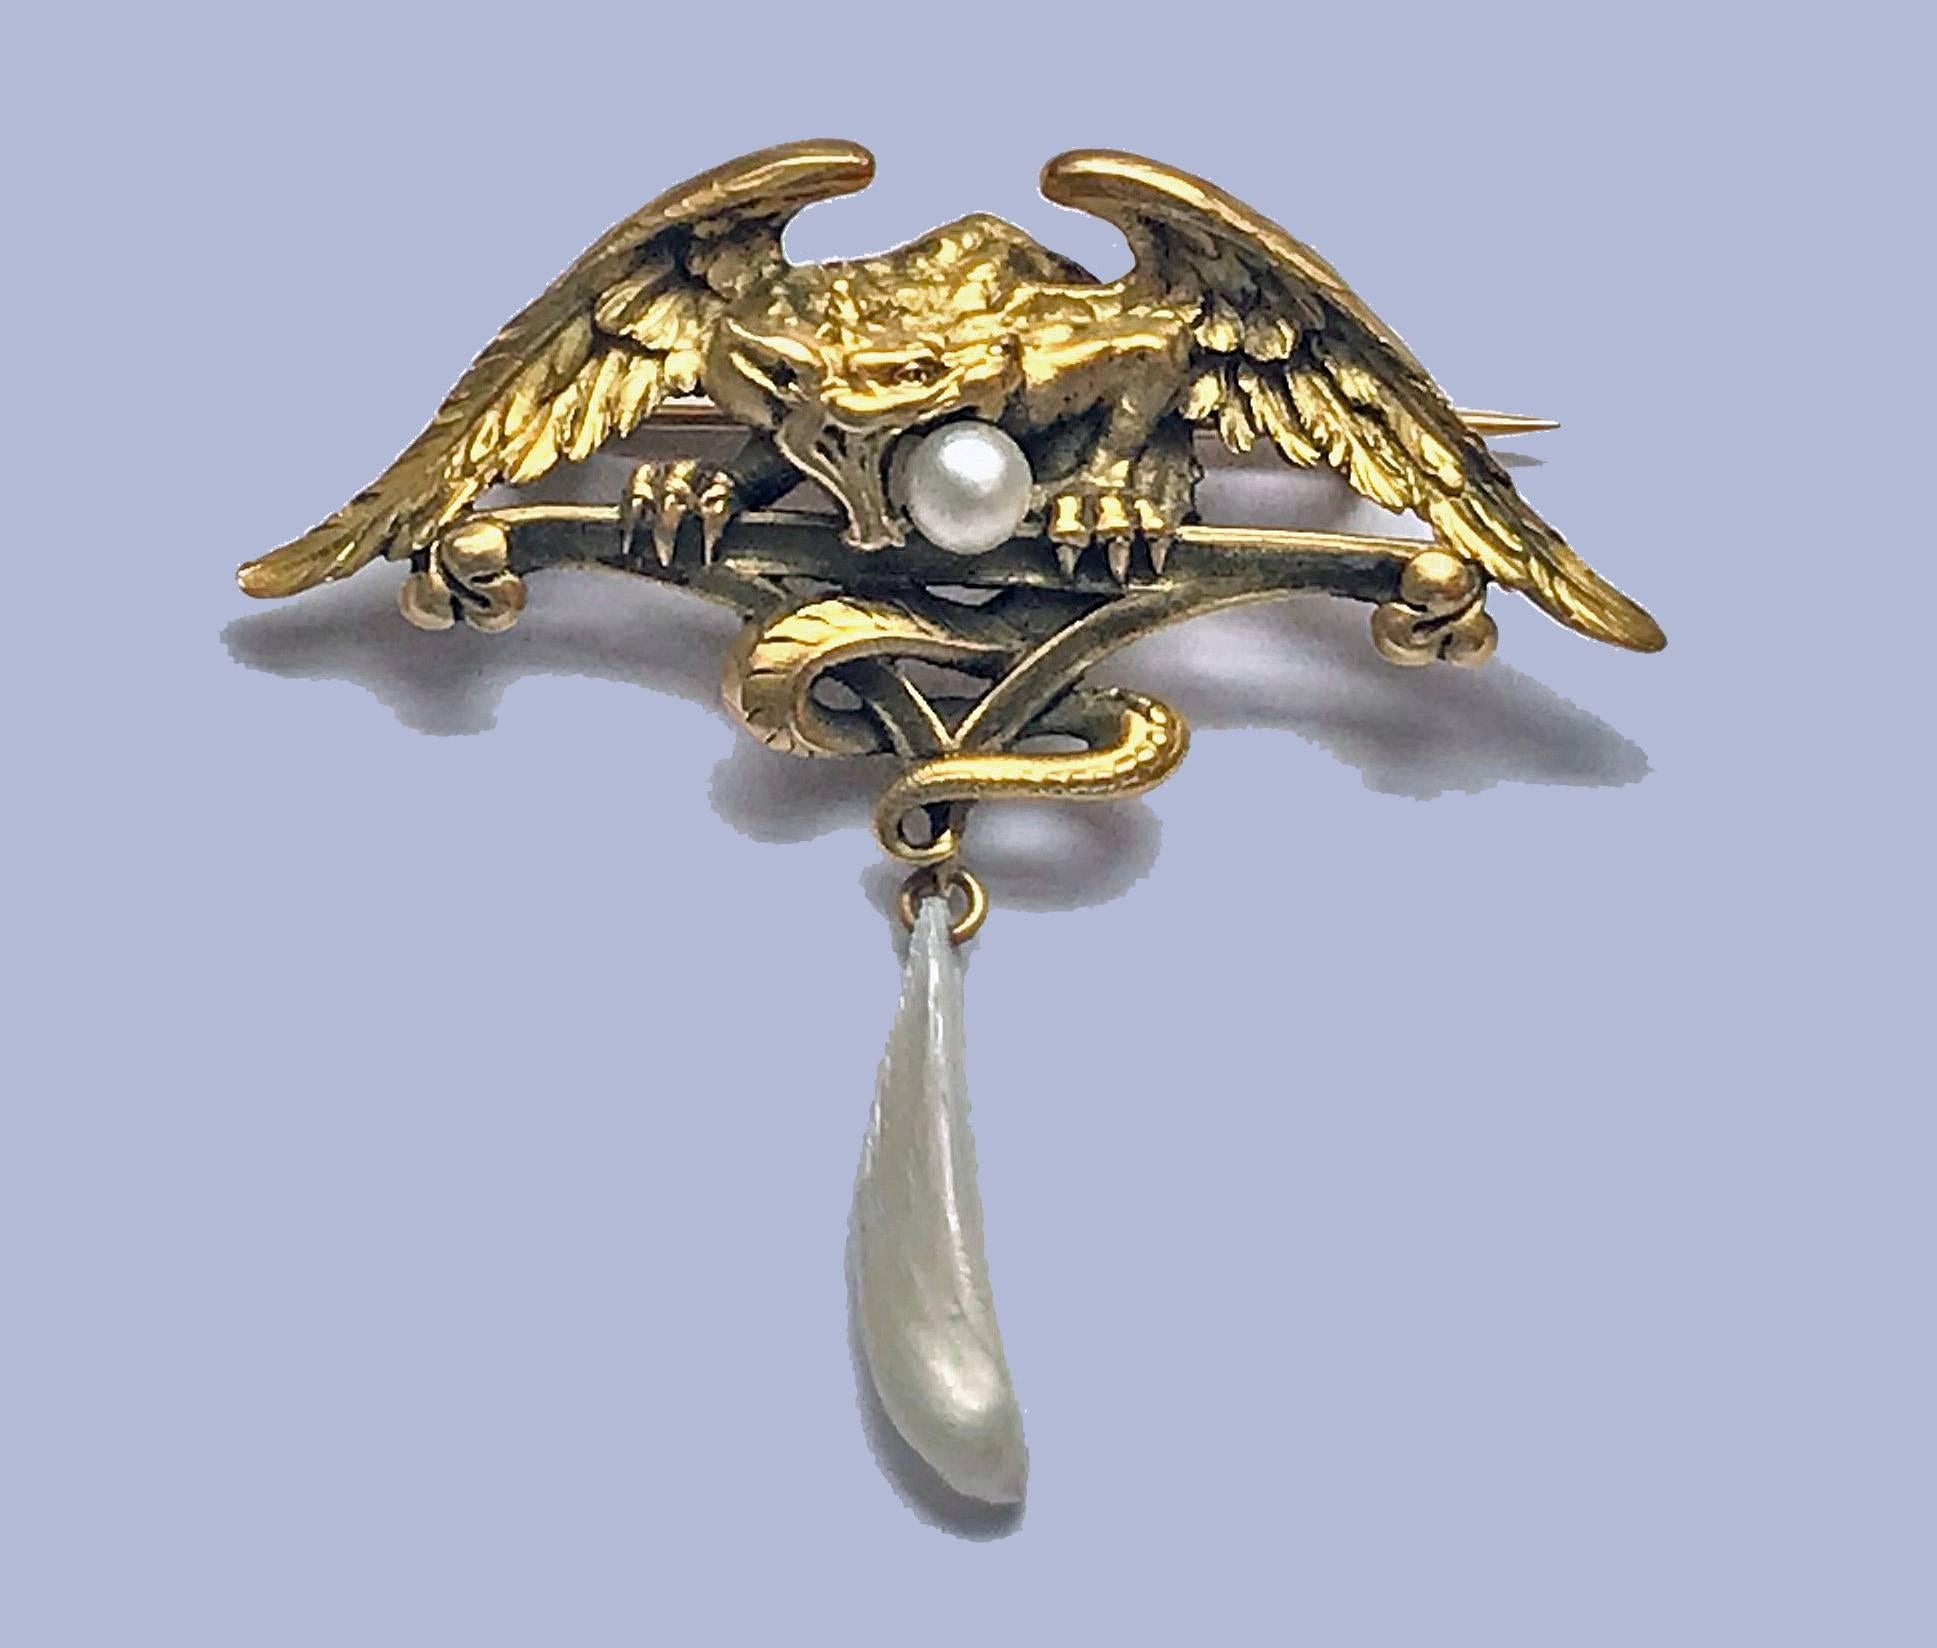 French Art Nouveau 18K mythological brooch Pendant, C.1900; depicting a mythological combination including part eagle, part serpent griffin carrying a pearl in mouth and suspending a mother of pearl. Width (wing spread): 2.25 inches. Drop: 2 inches.